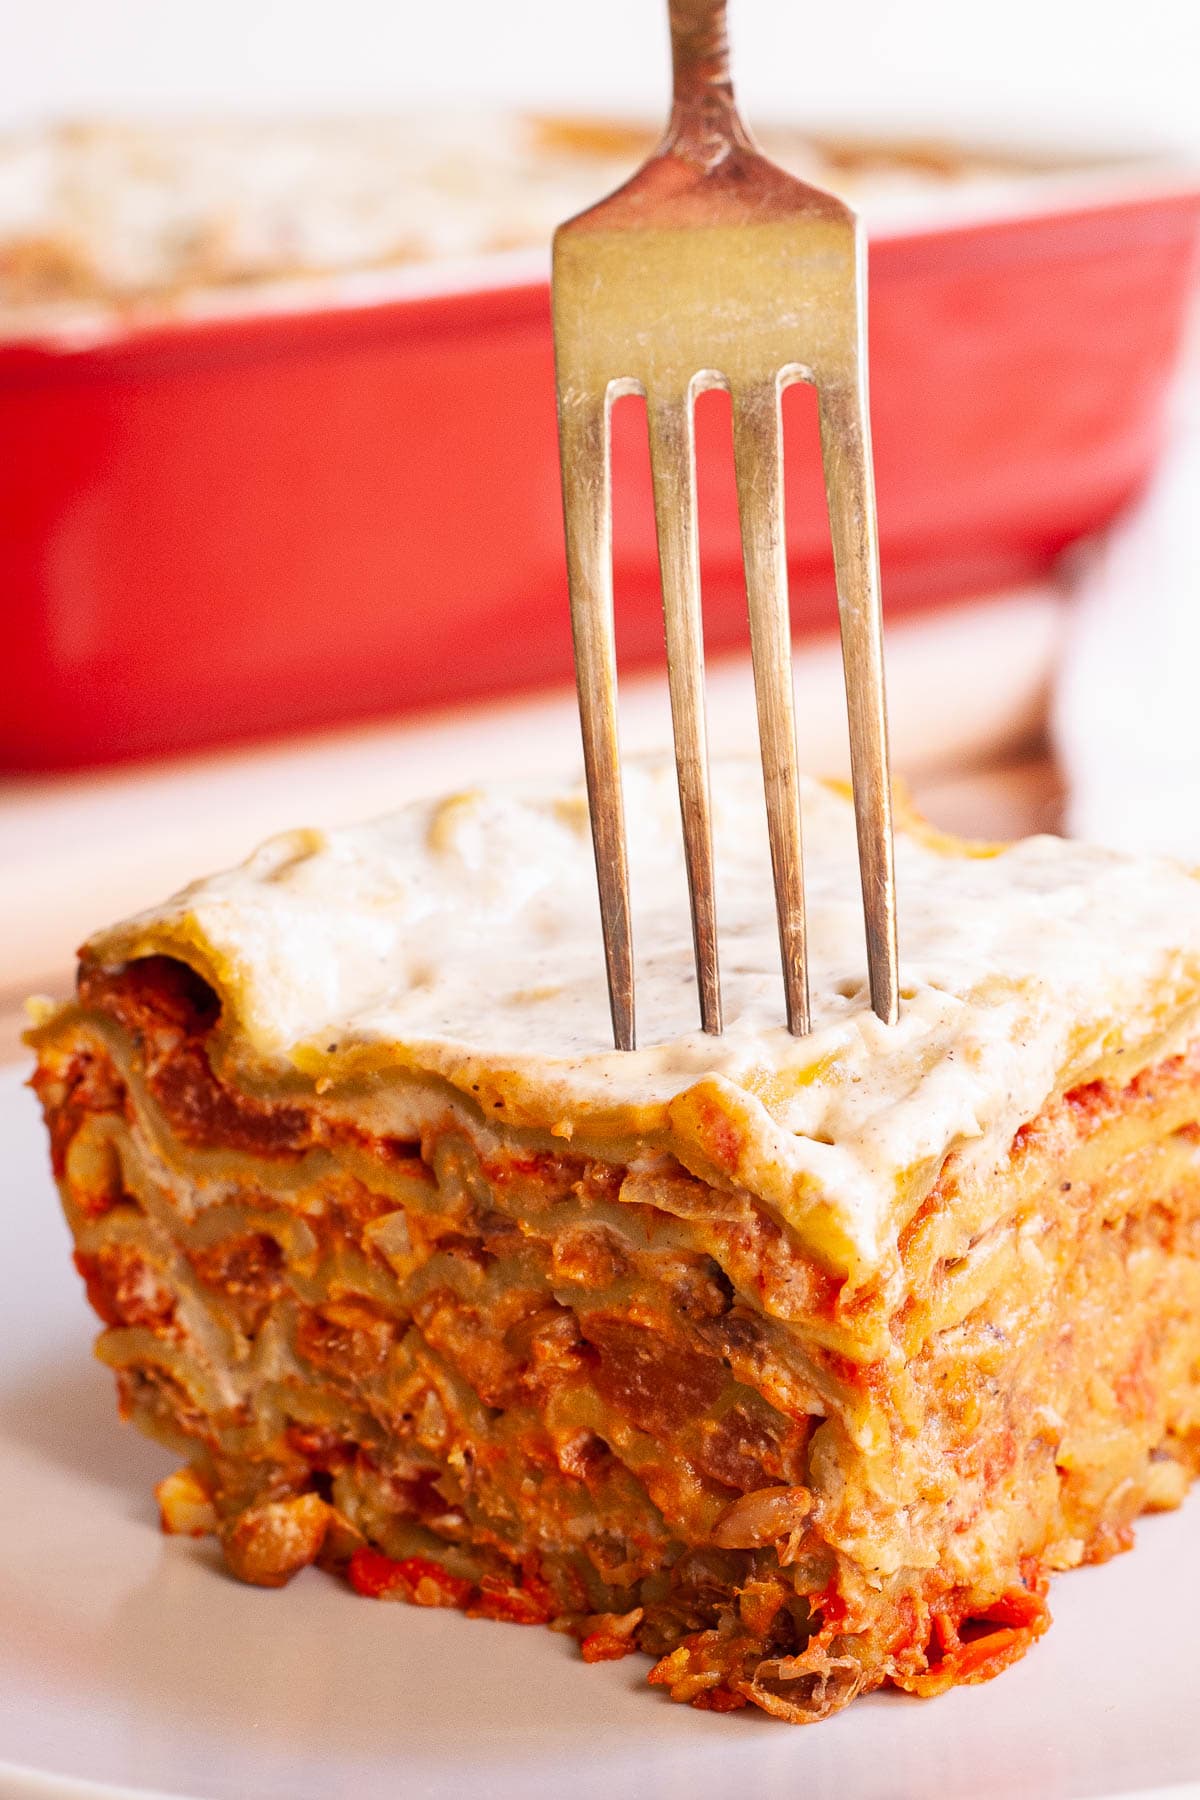 A slice of layered lasagna is on a plate. A fork is piercing through the middle.